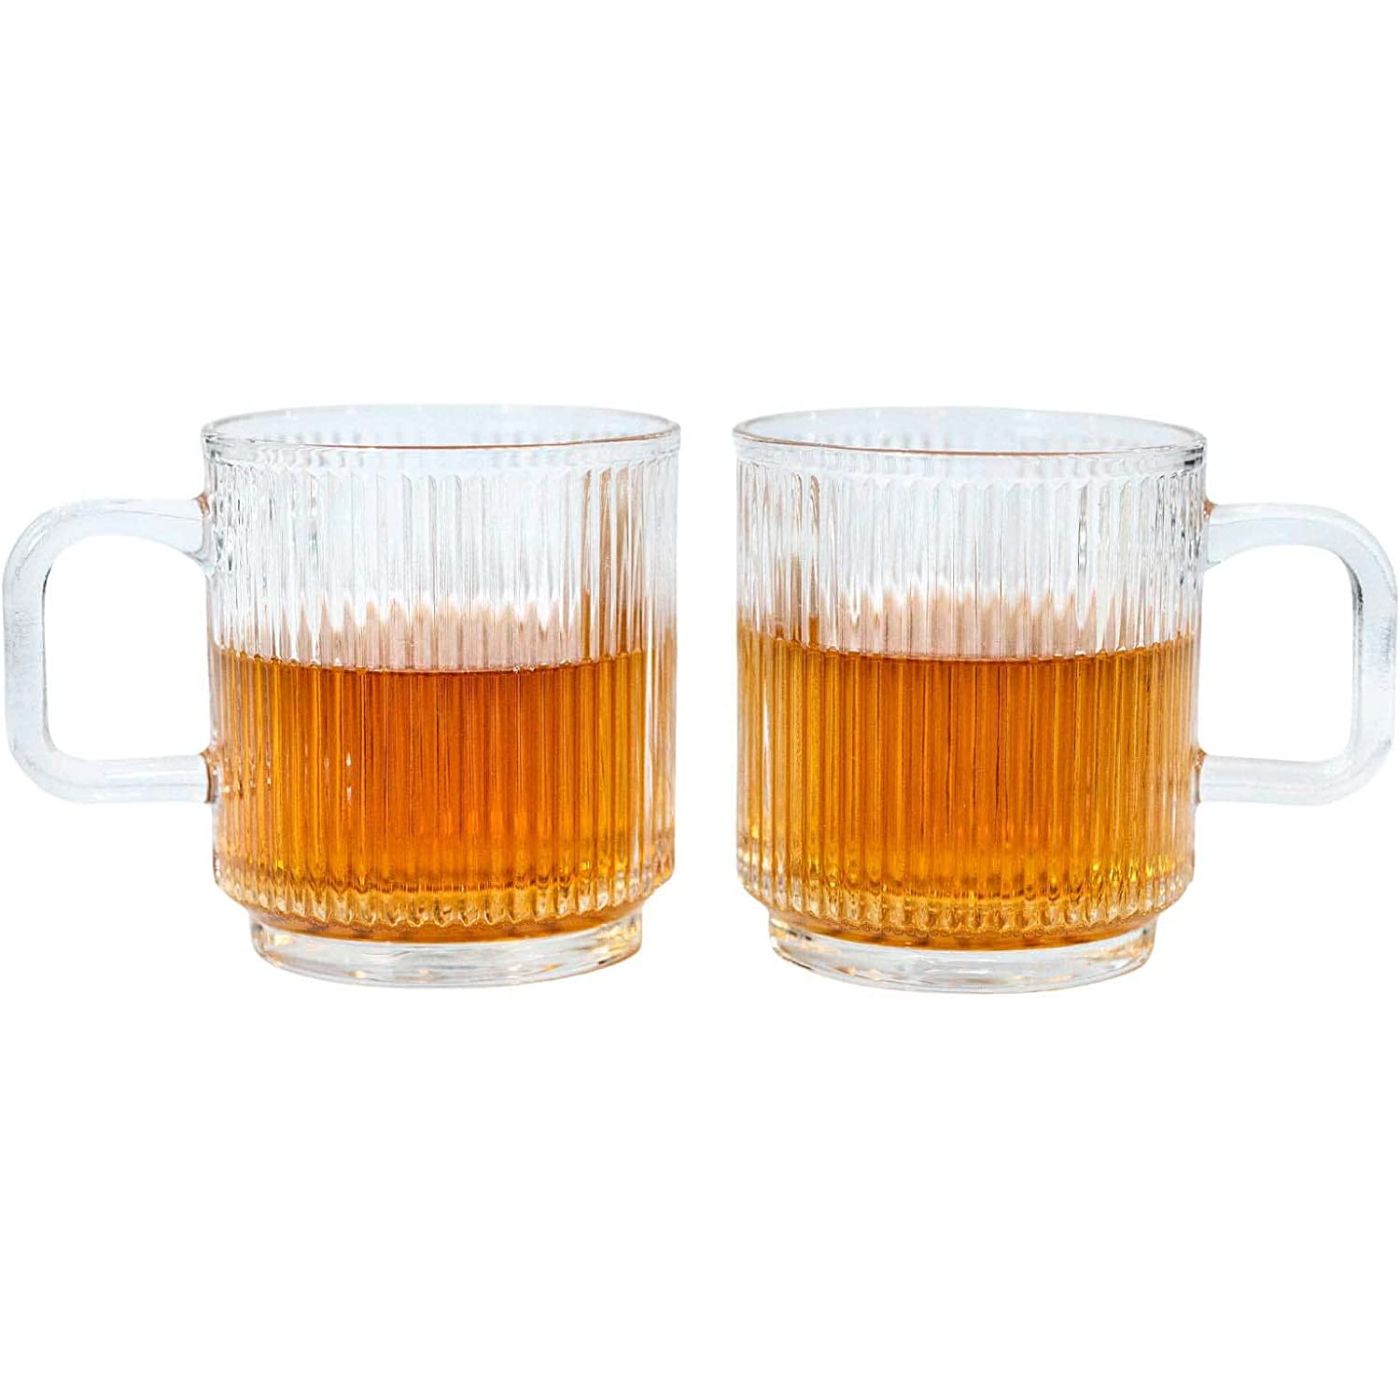 Greenline Goods Ribbed Ripple Art Deco Glassware Mugs Set of 2-12 oz Origami Style Glass Cups - Aesthetic Drinking Glasses - Retro Unique Fluted